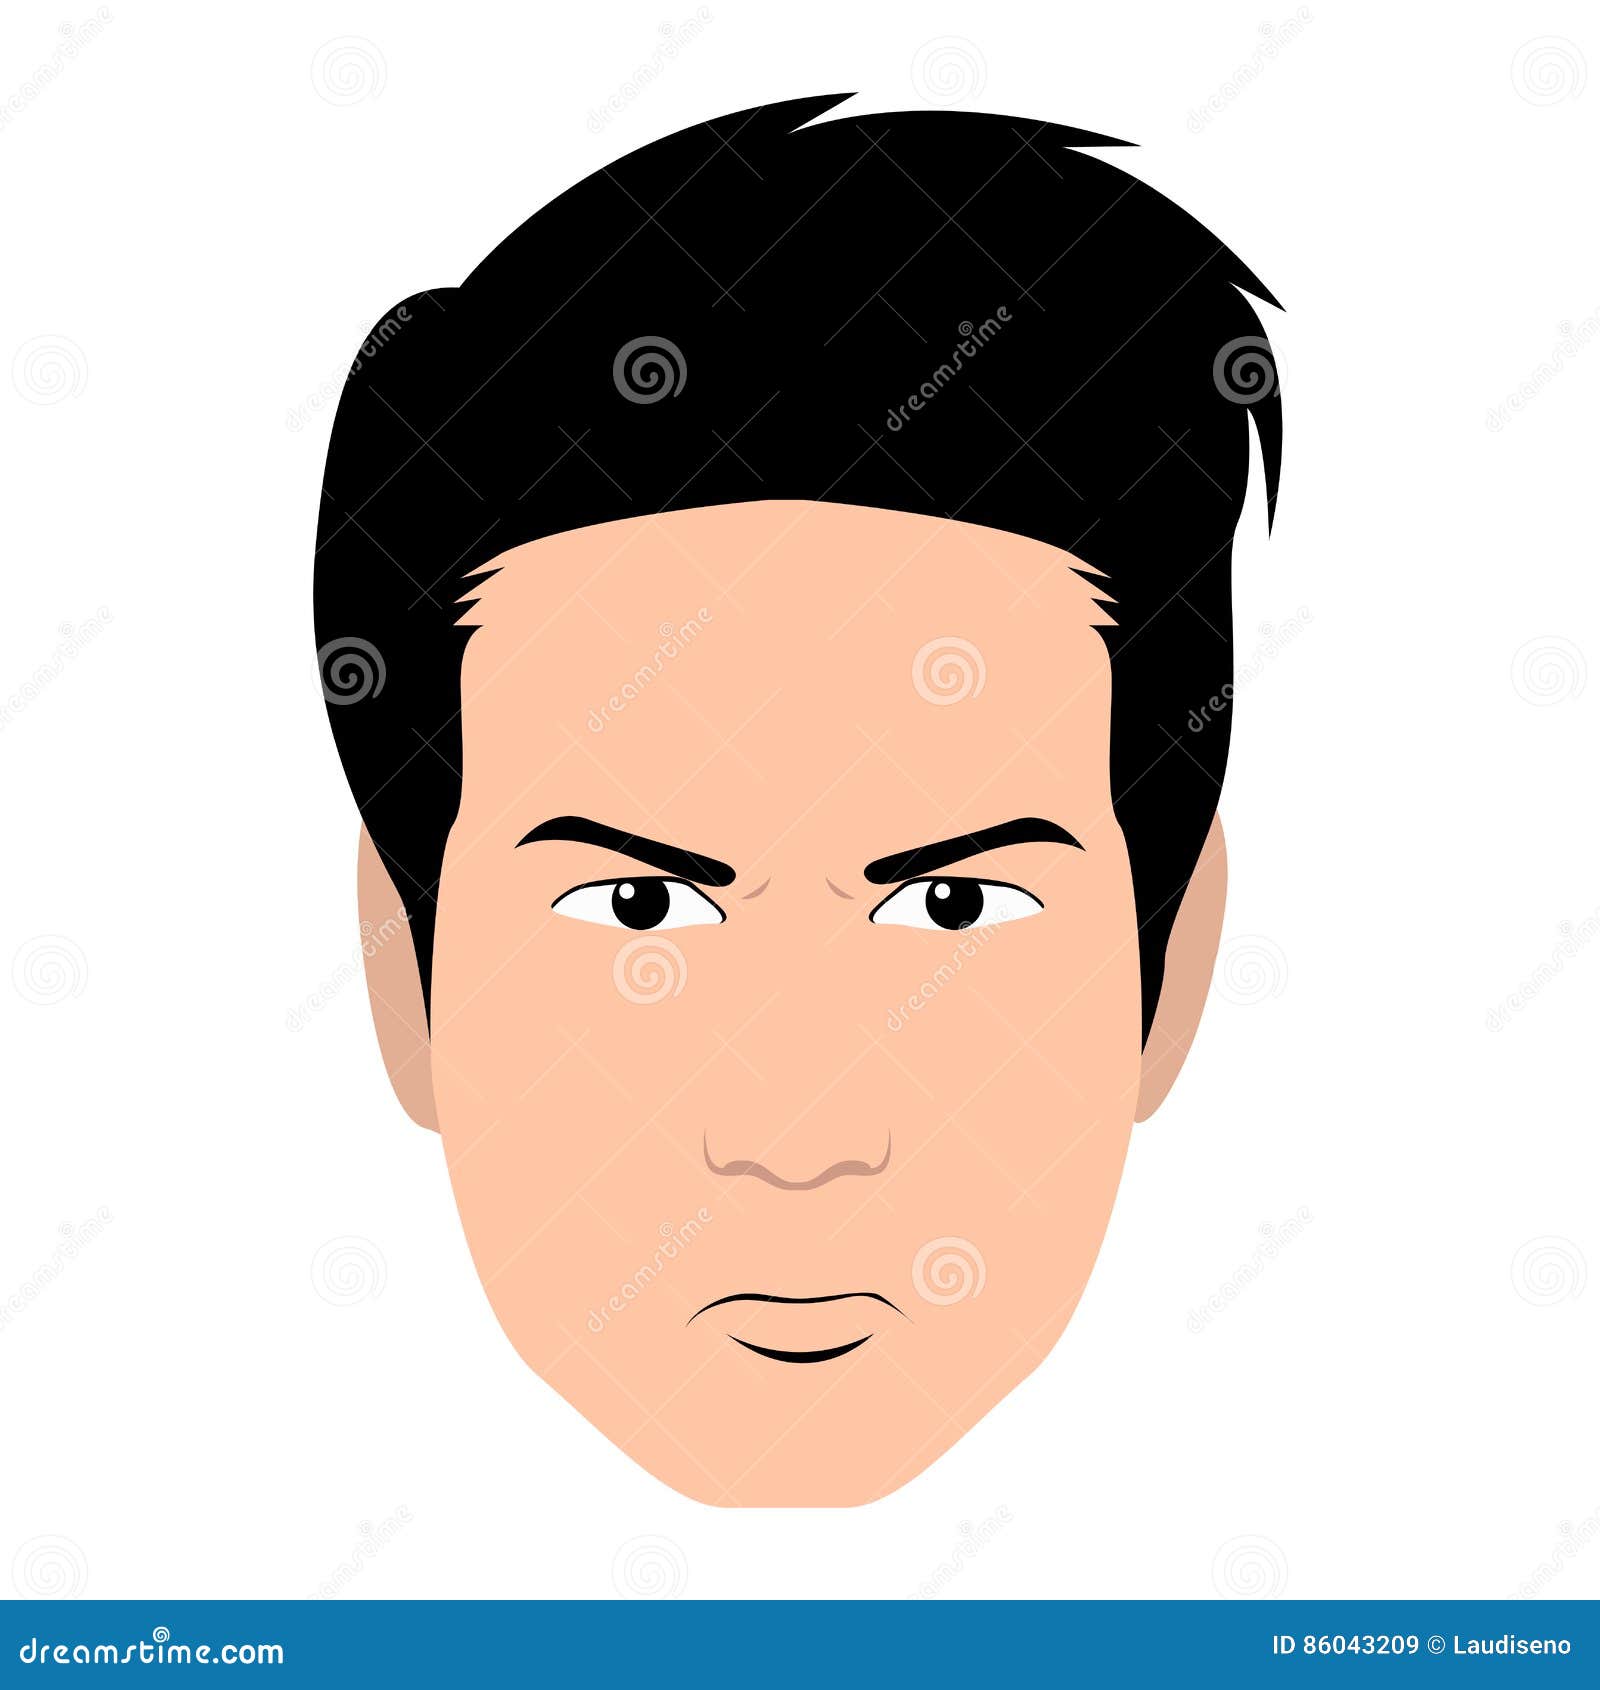 Isolated facial expression stock illustration. Illustration of ...